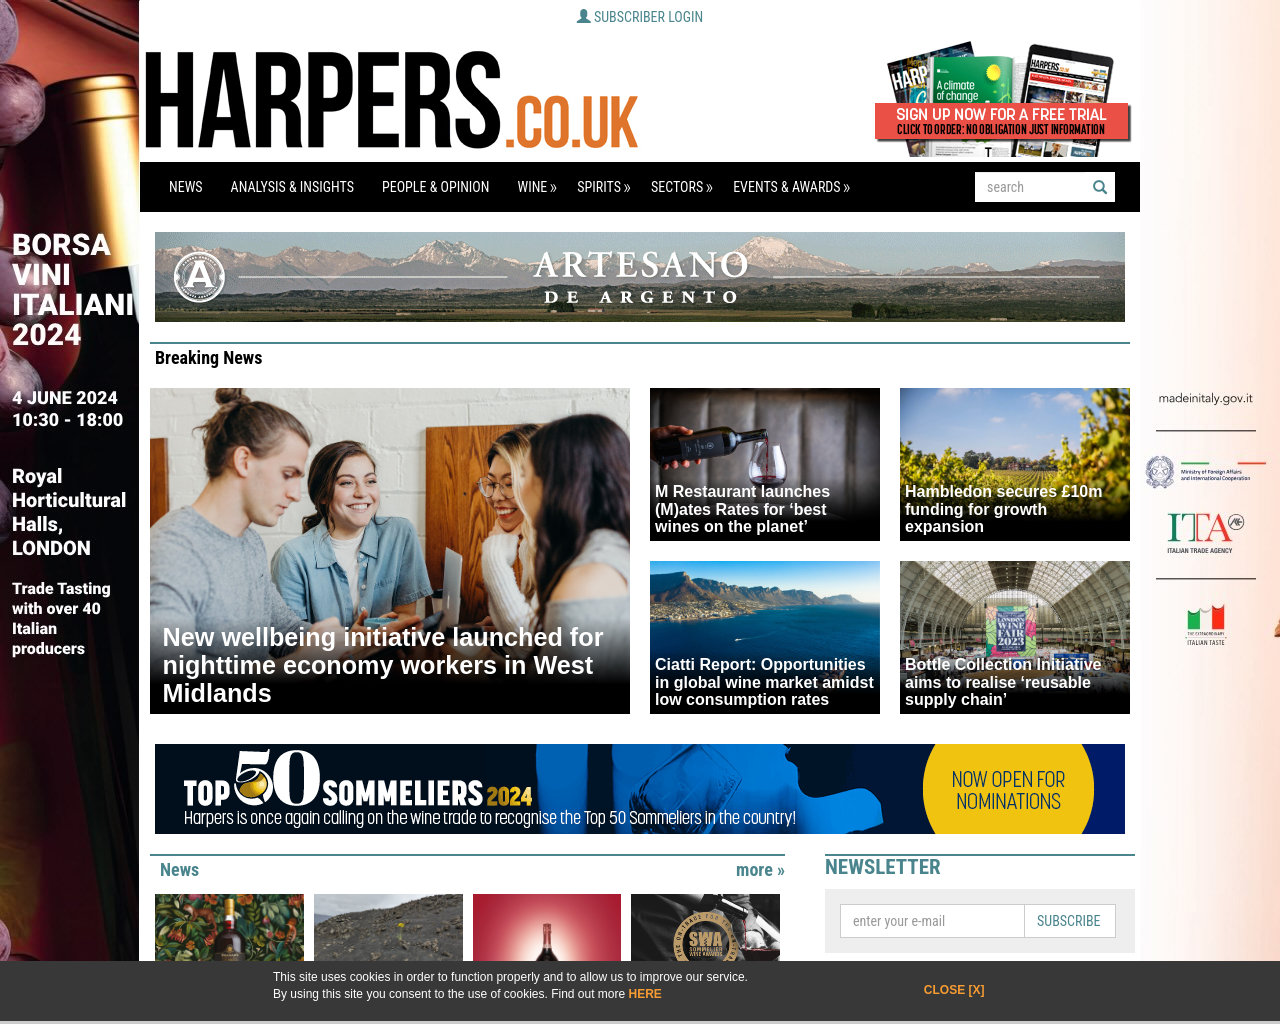 harpers.co.uk